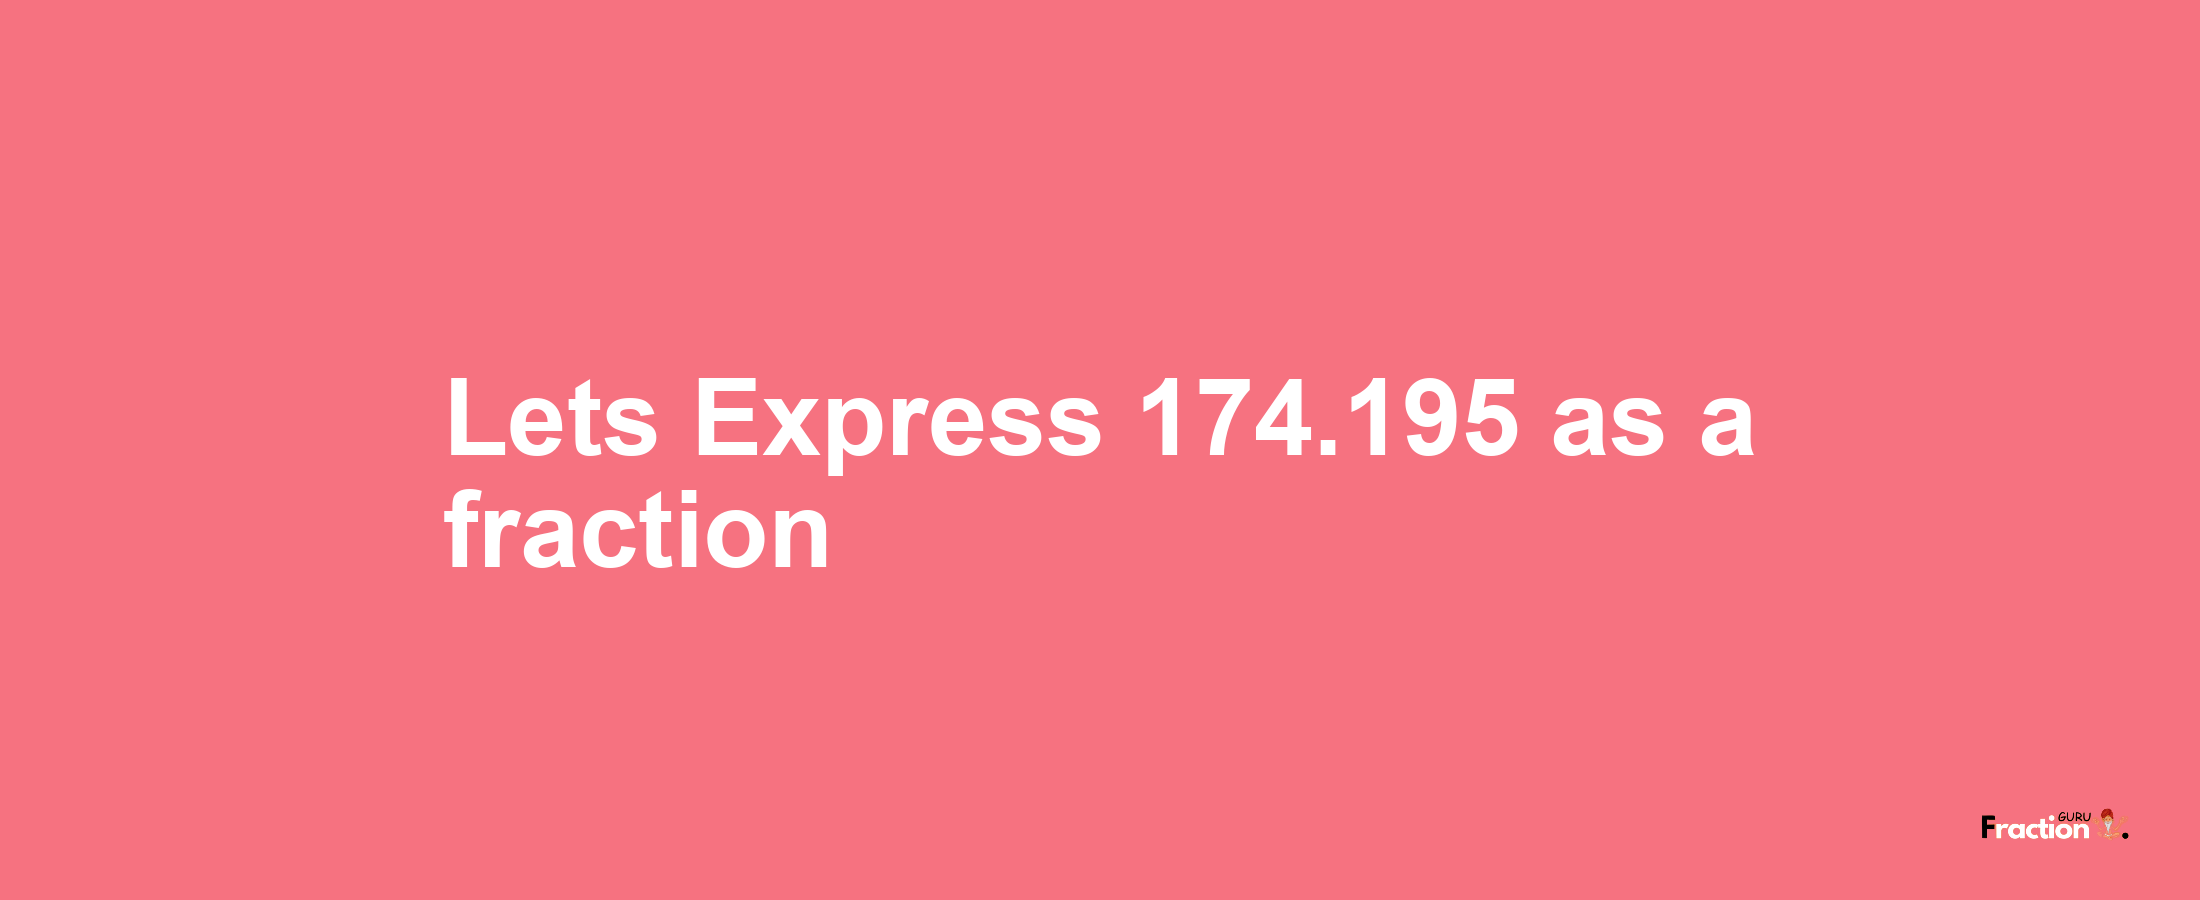 Lets Express 174.195 as afraction